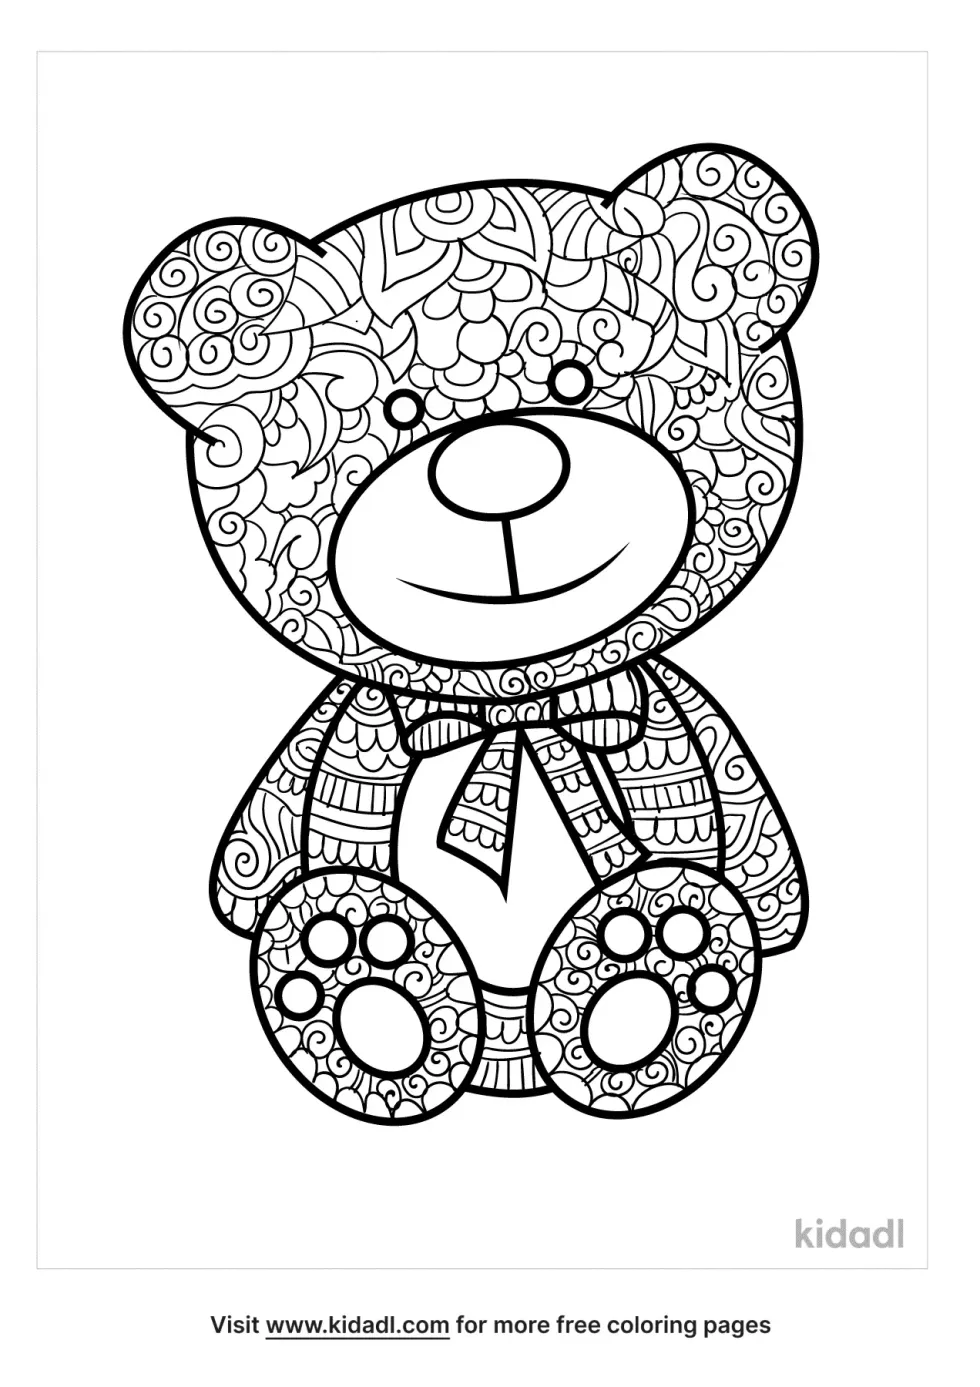 Zentangle Teddy Bear Coloring Page